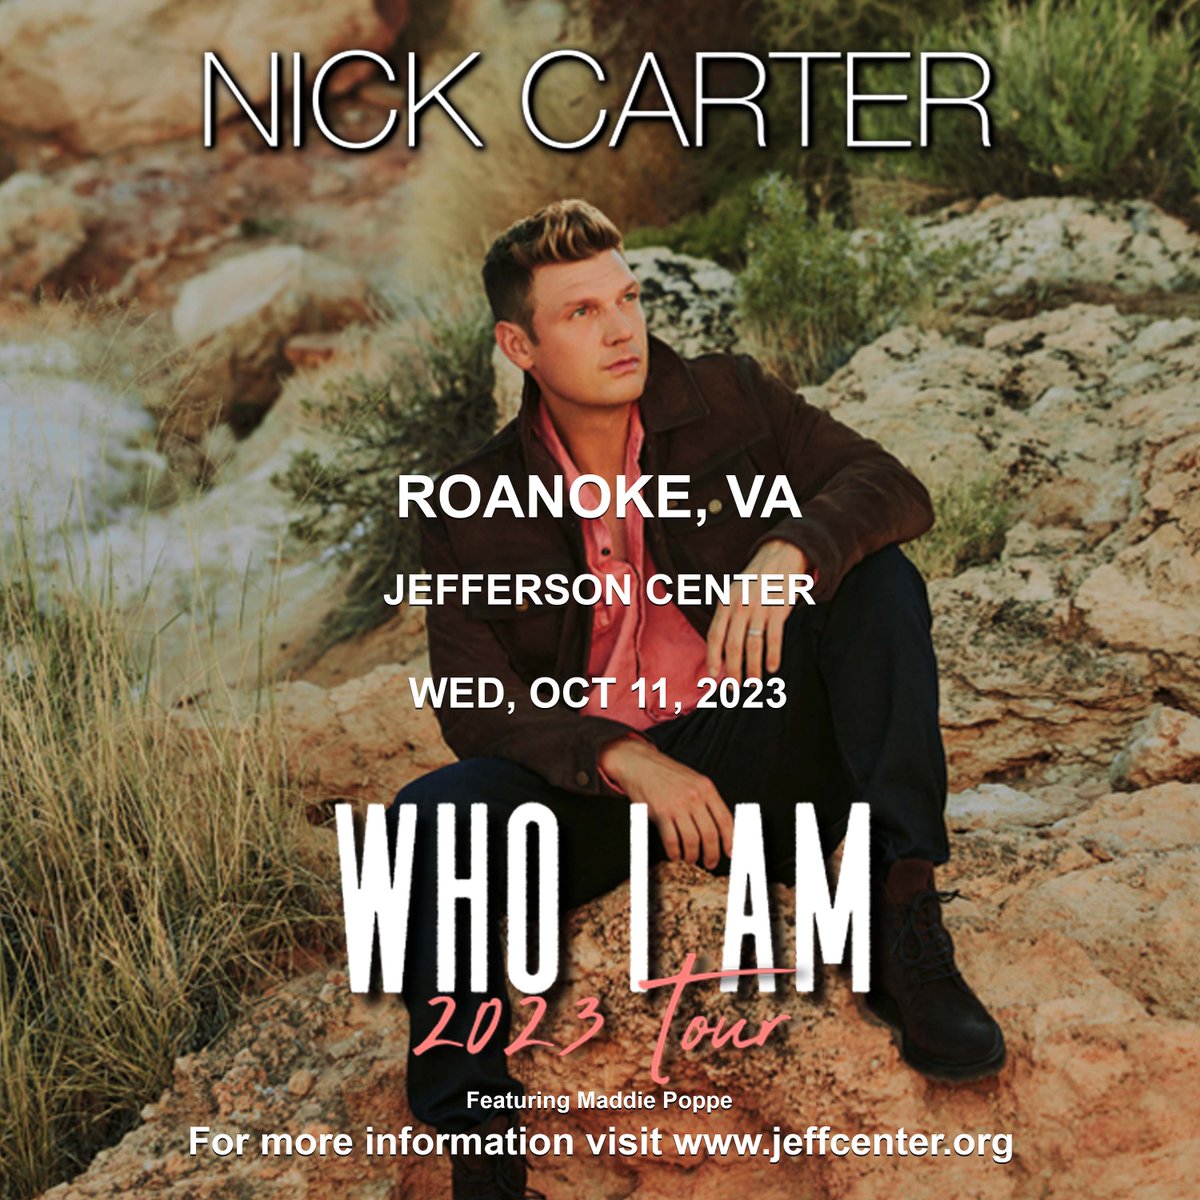 Nick Carter featuring Maddie Poppe at Jefferson Center on Wed, Oct 11!  This best selling Backstreet Boy has kept the fires going all these years and is bringing it to Roanoke along with rising pop star Maddie Poppe!  On sale THIS Friday, July 21.
@NickCarter @MaddiePoppe